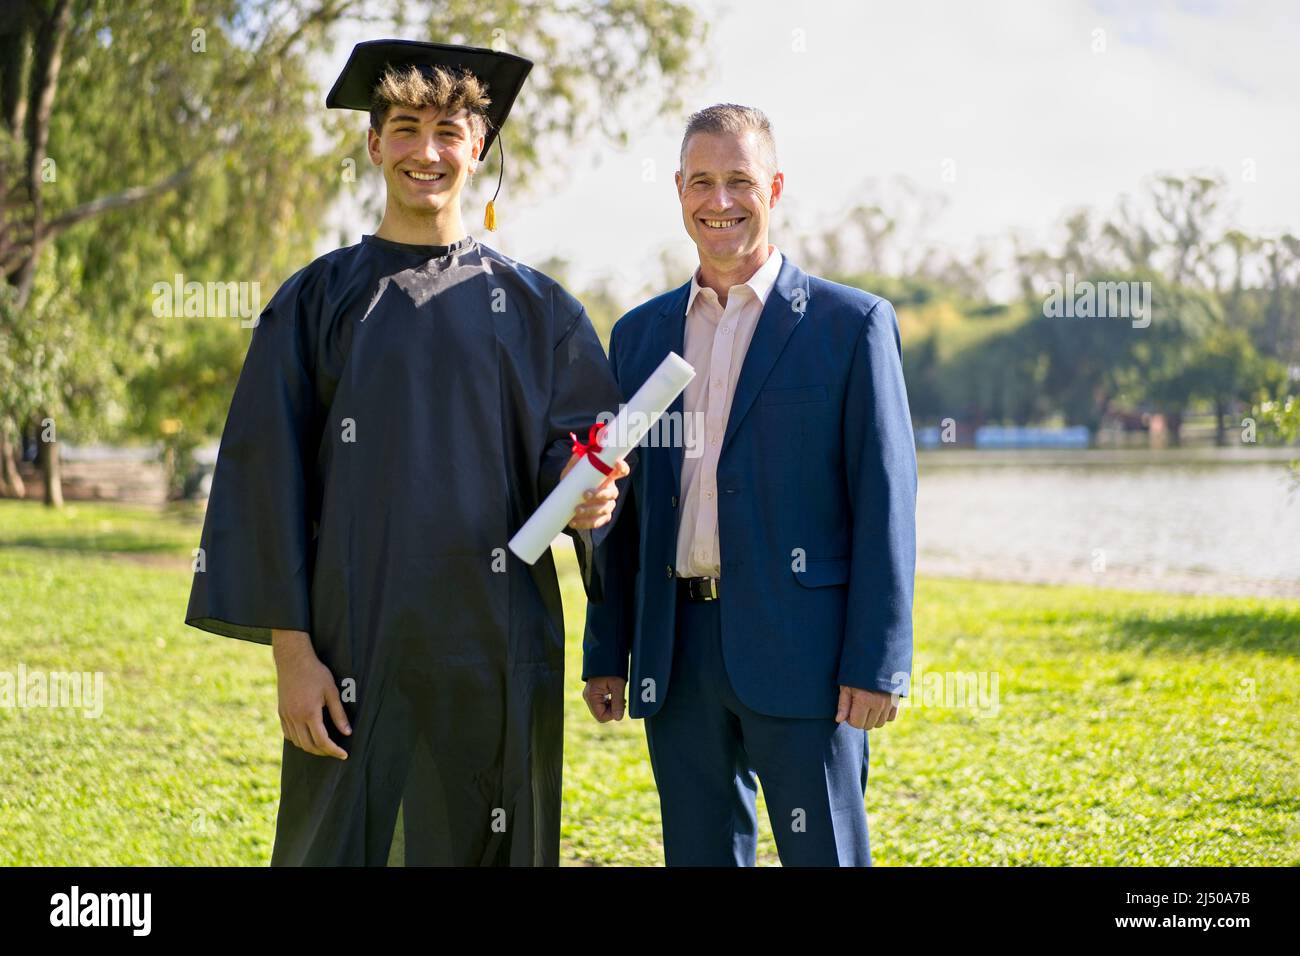 Young recently graduated boy, dressed in cap and gown, with his degree in hand, celebrating with his father on the university campus. Very happy expre Stock Photo